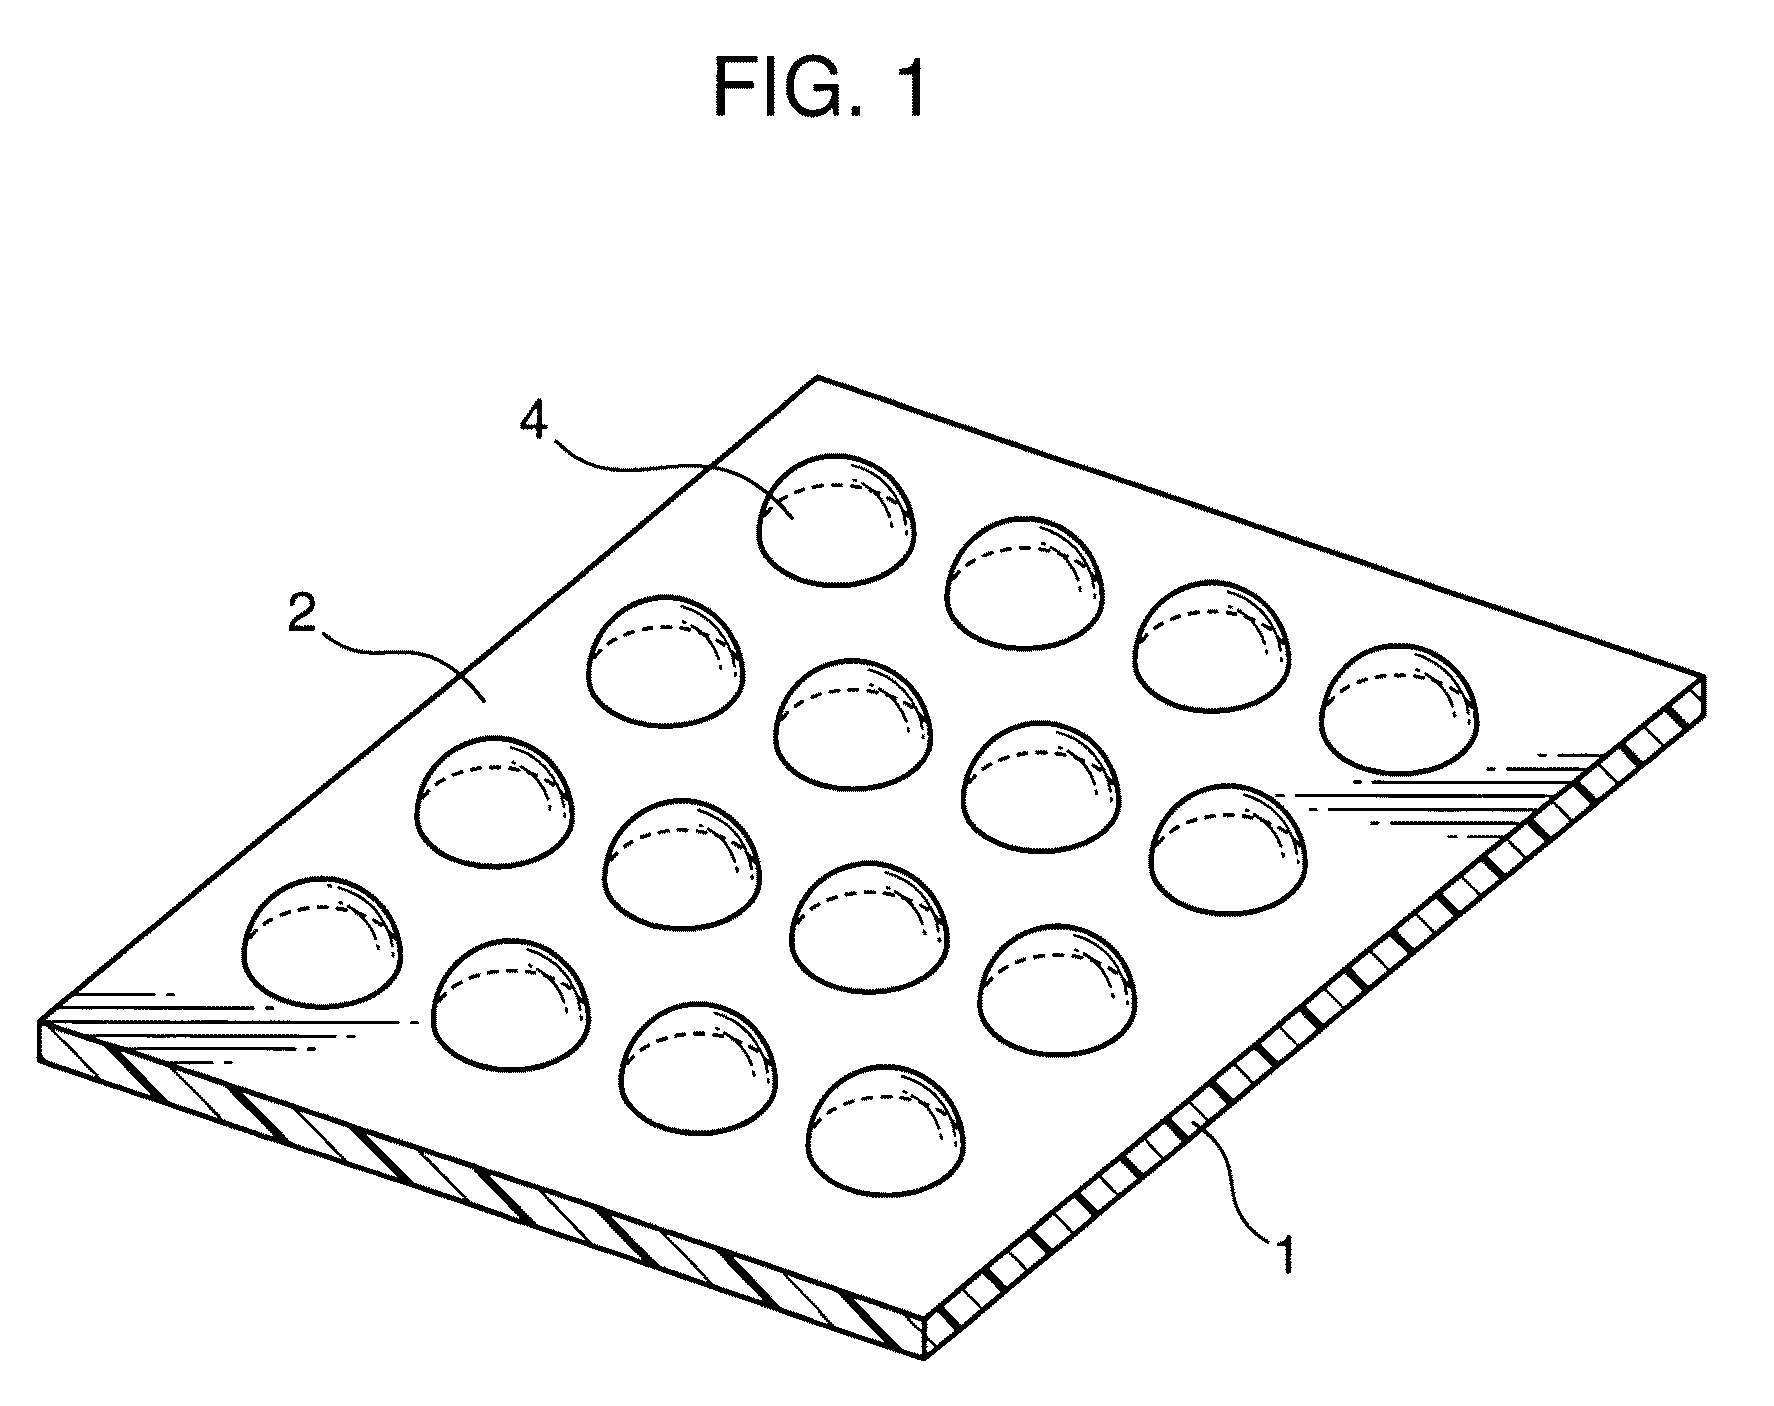 Micro lens, micro lens array, and method of manufacturing the same